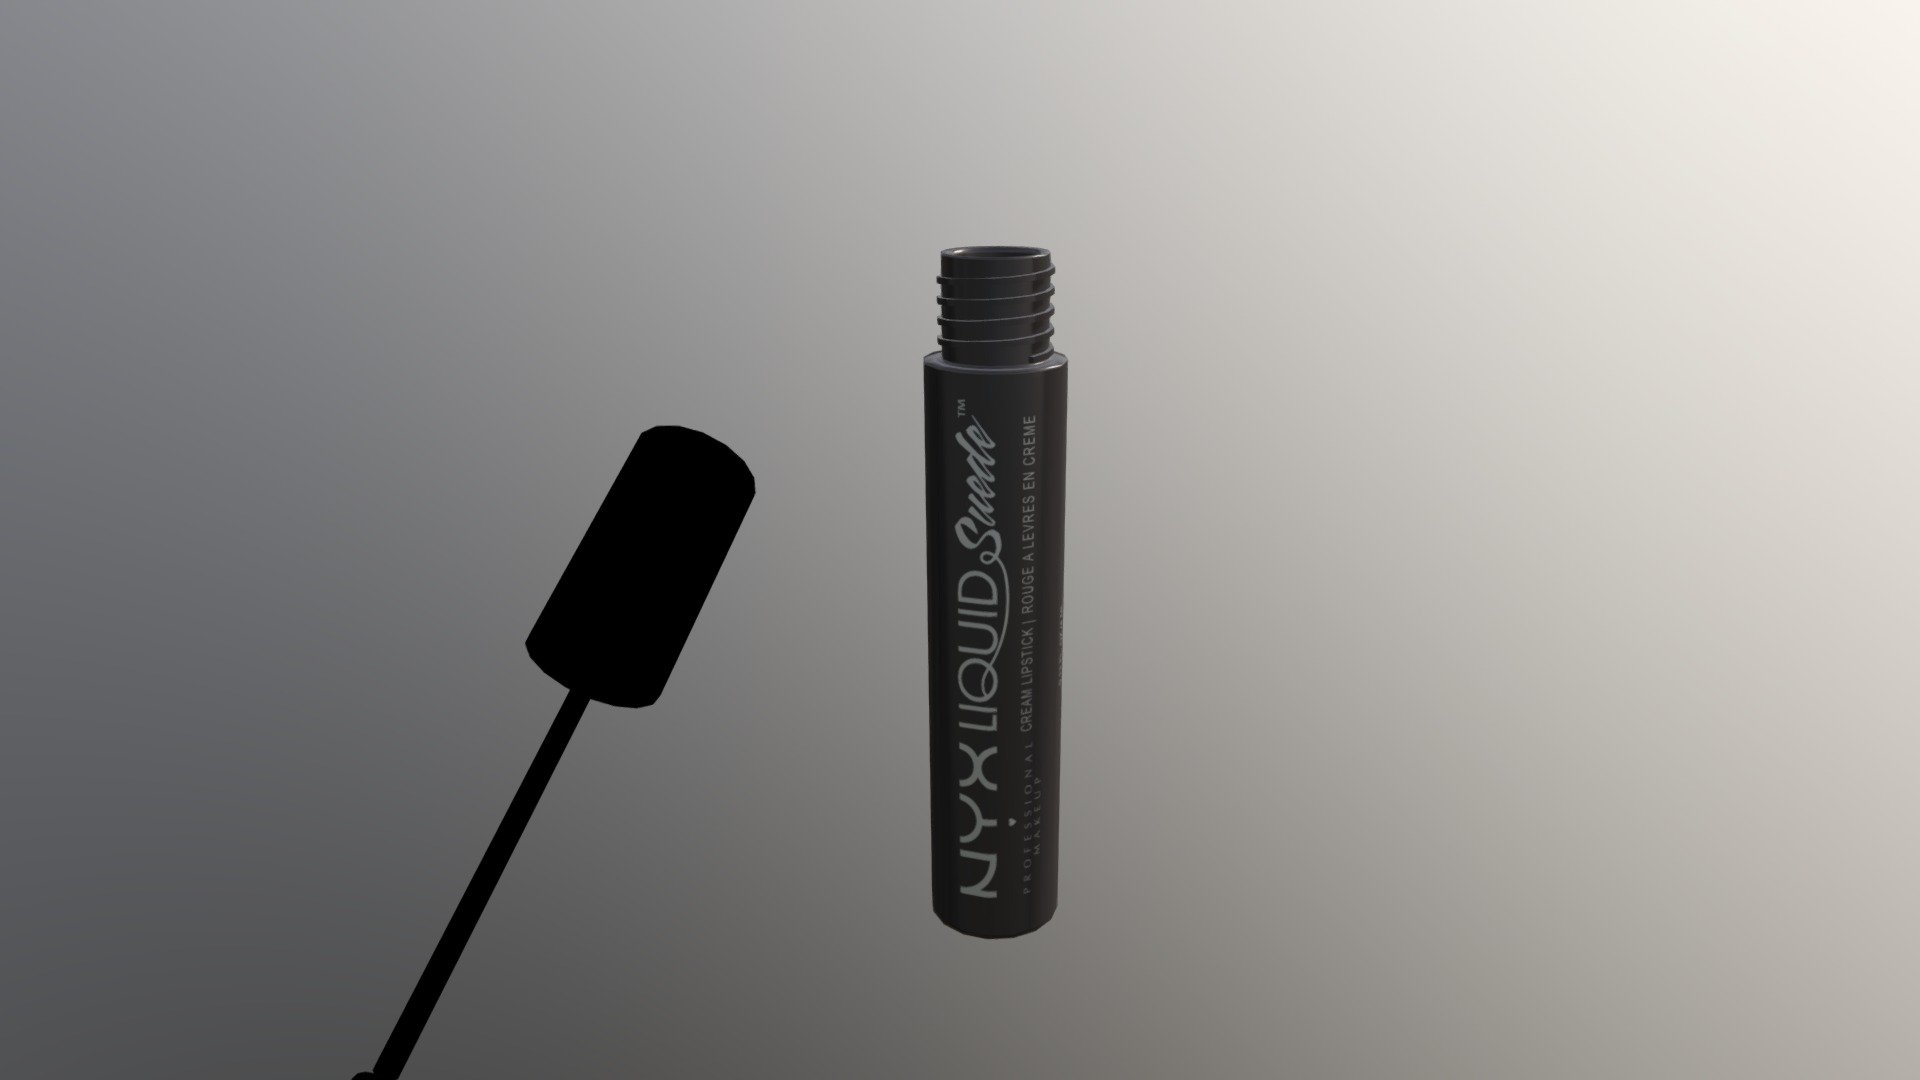 This is a model I helped make while at Cubicle Ninjas for the VR Project we made for Nyx Professional Makeup in the fall of 2017. I worked with the model I was provided as a base, and I remade and rigged the cap with the brush to match the branding on Nyx's website, and I was provided  the physical product to match as well. I also unwrapped the model to create the texture.

The model is 3108 tris, 1 draw call with the texture size at 2048 x 2048, and I made the entire texture using primarily illustrator for all the text and labeling in vector format. I did not make the liquid suede logo or the nyx logo here, they were provided to me by another graphic designer I worked with on this project 3d model